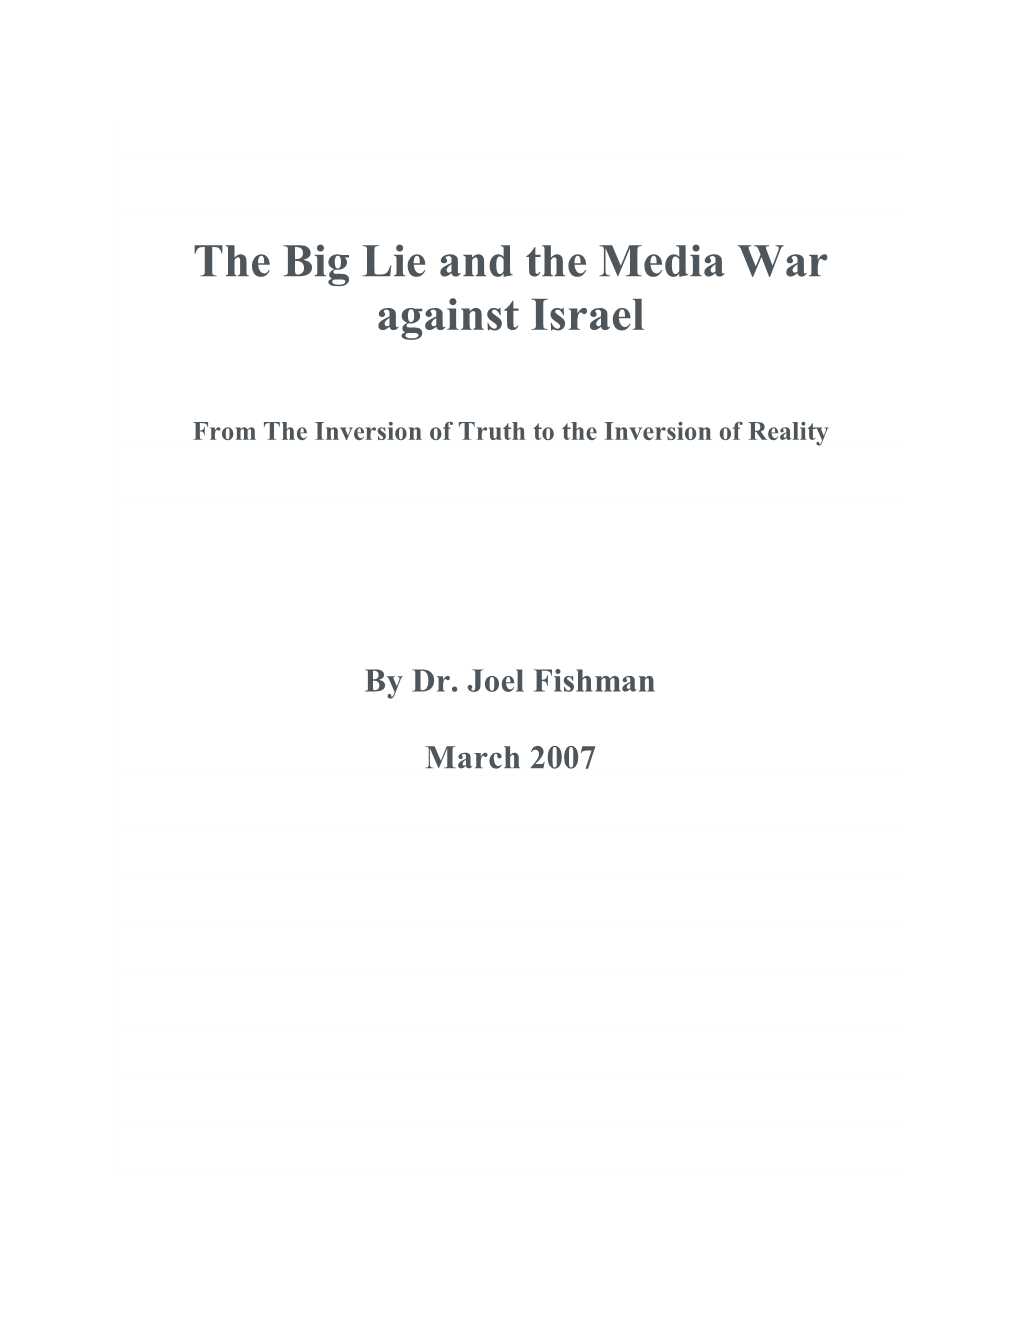 The Big Lie and the Media War Against Israel